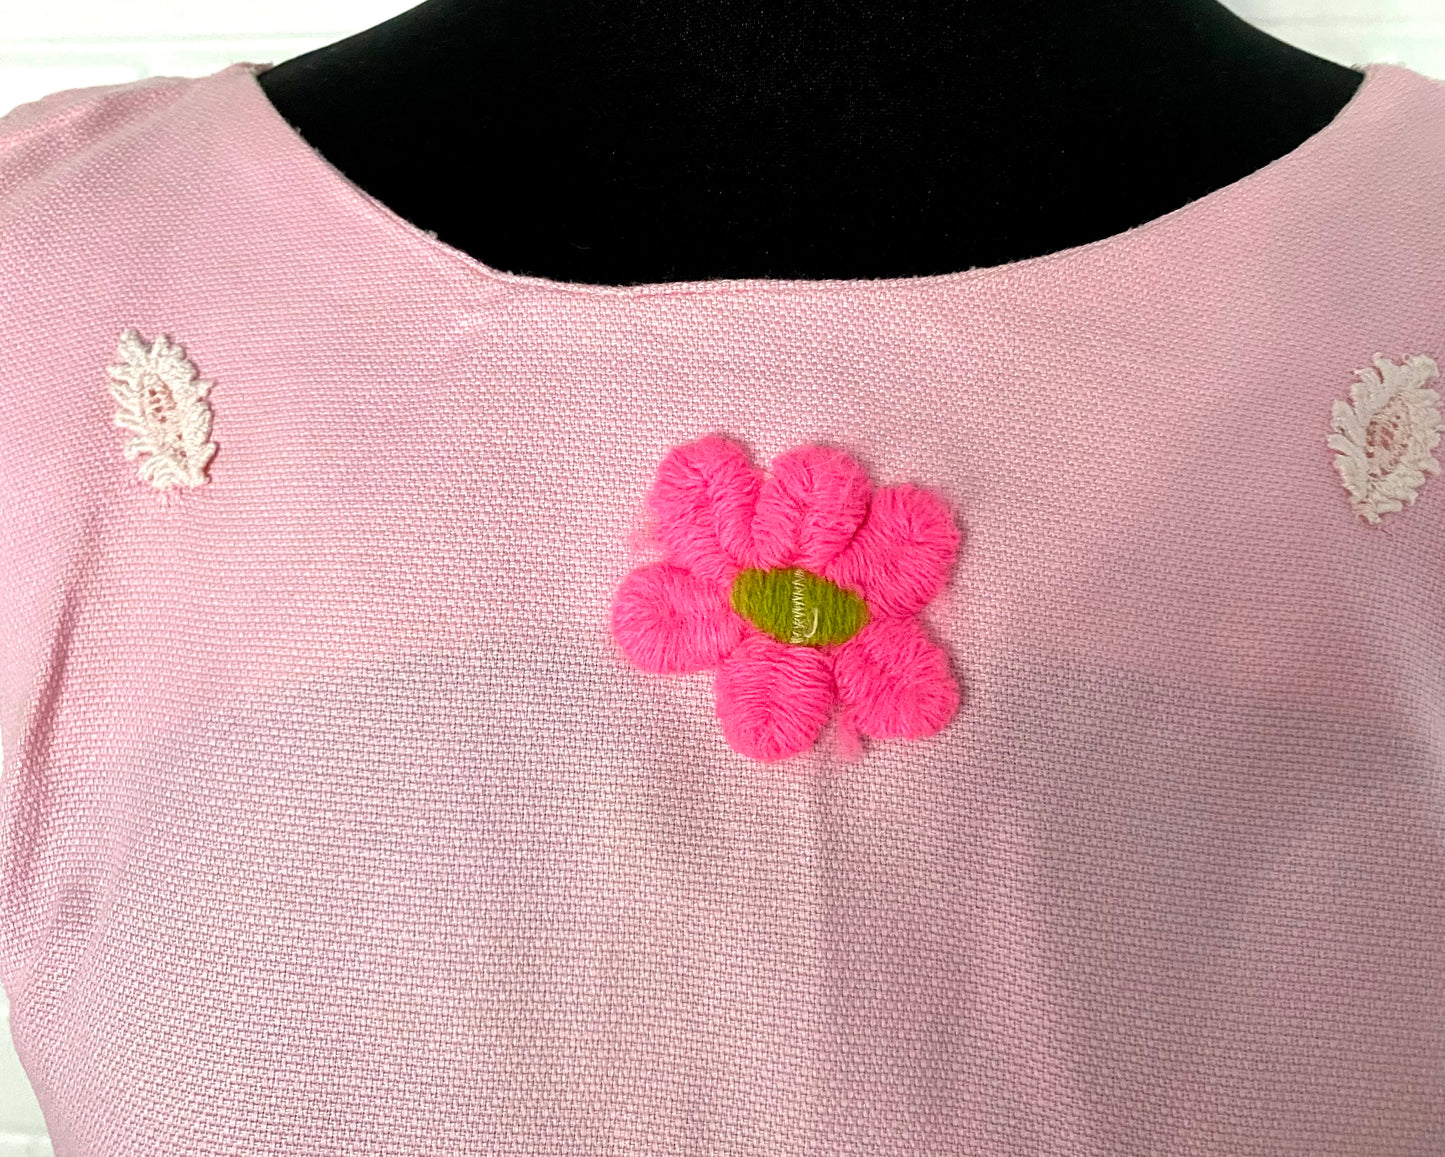 1960s Sleeveless Crop Top With Flower Embellishments